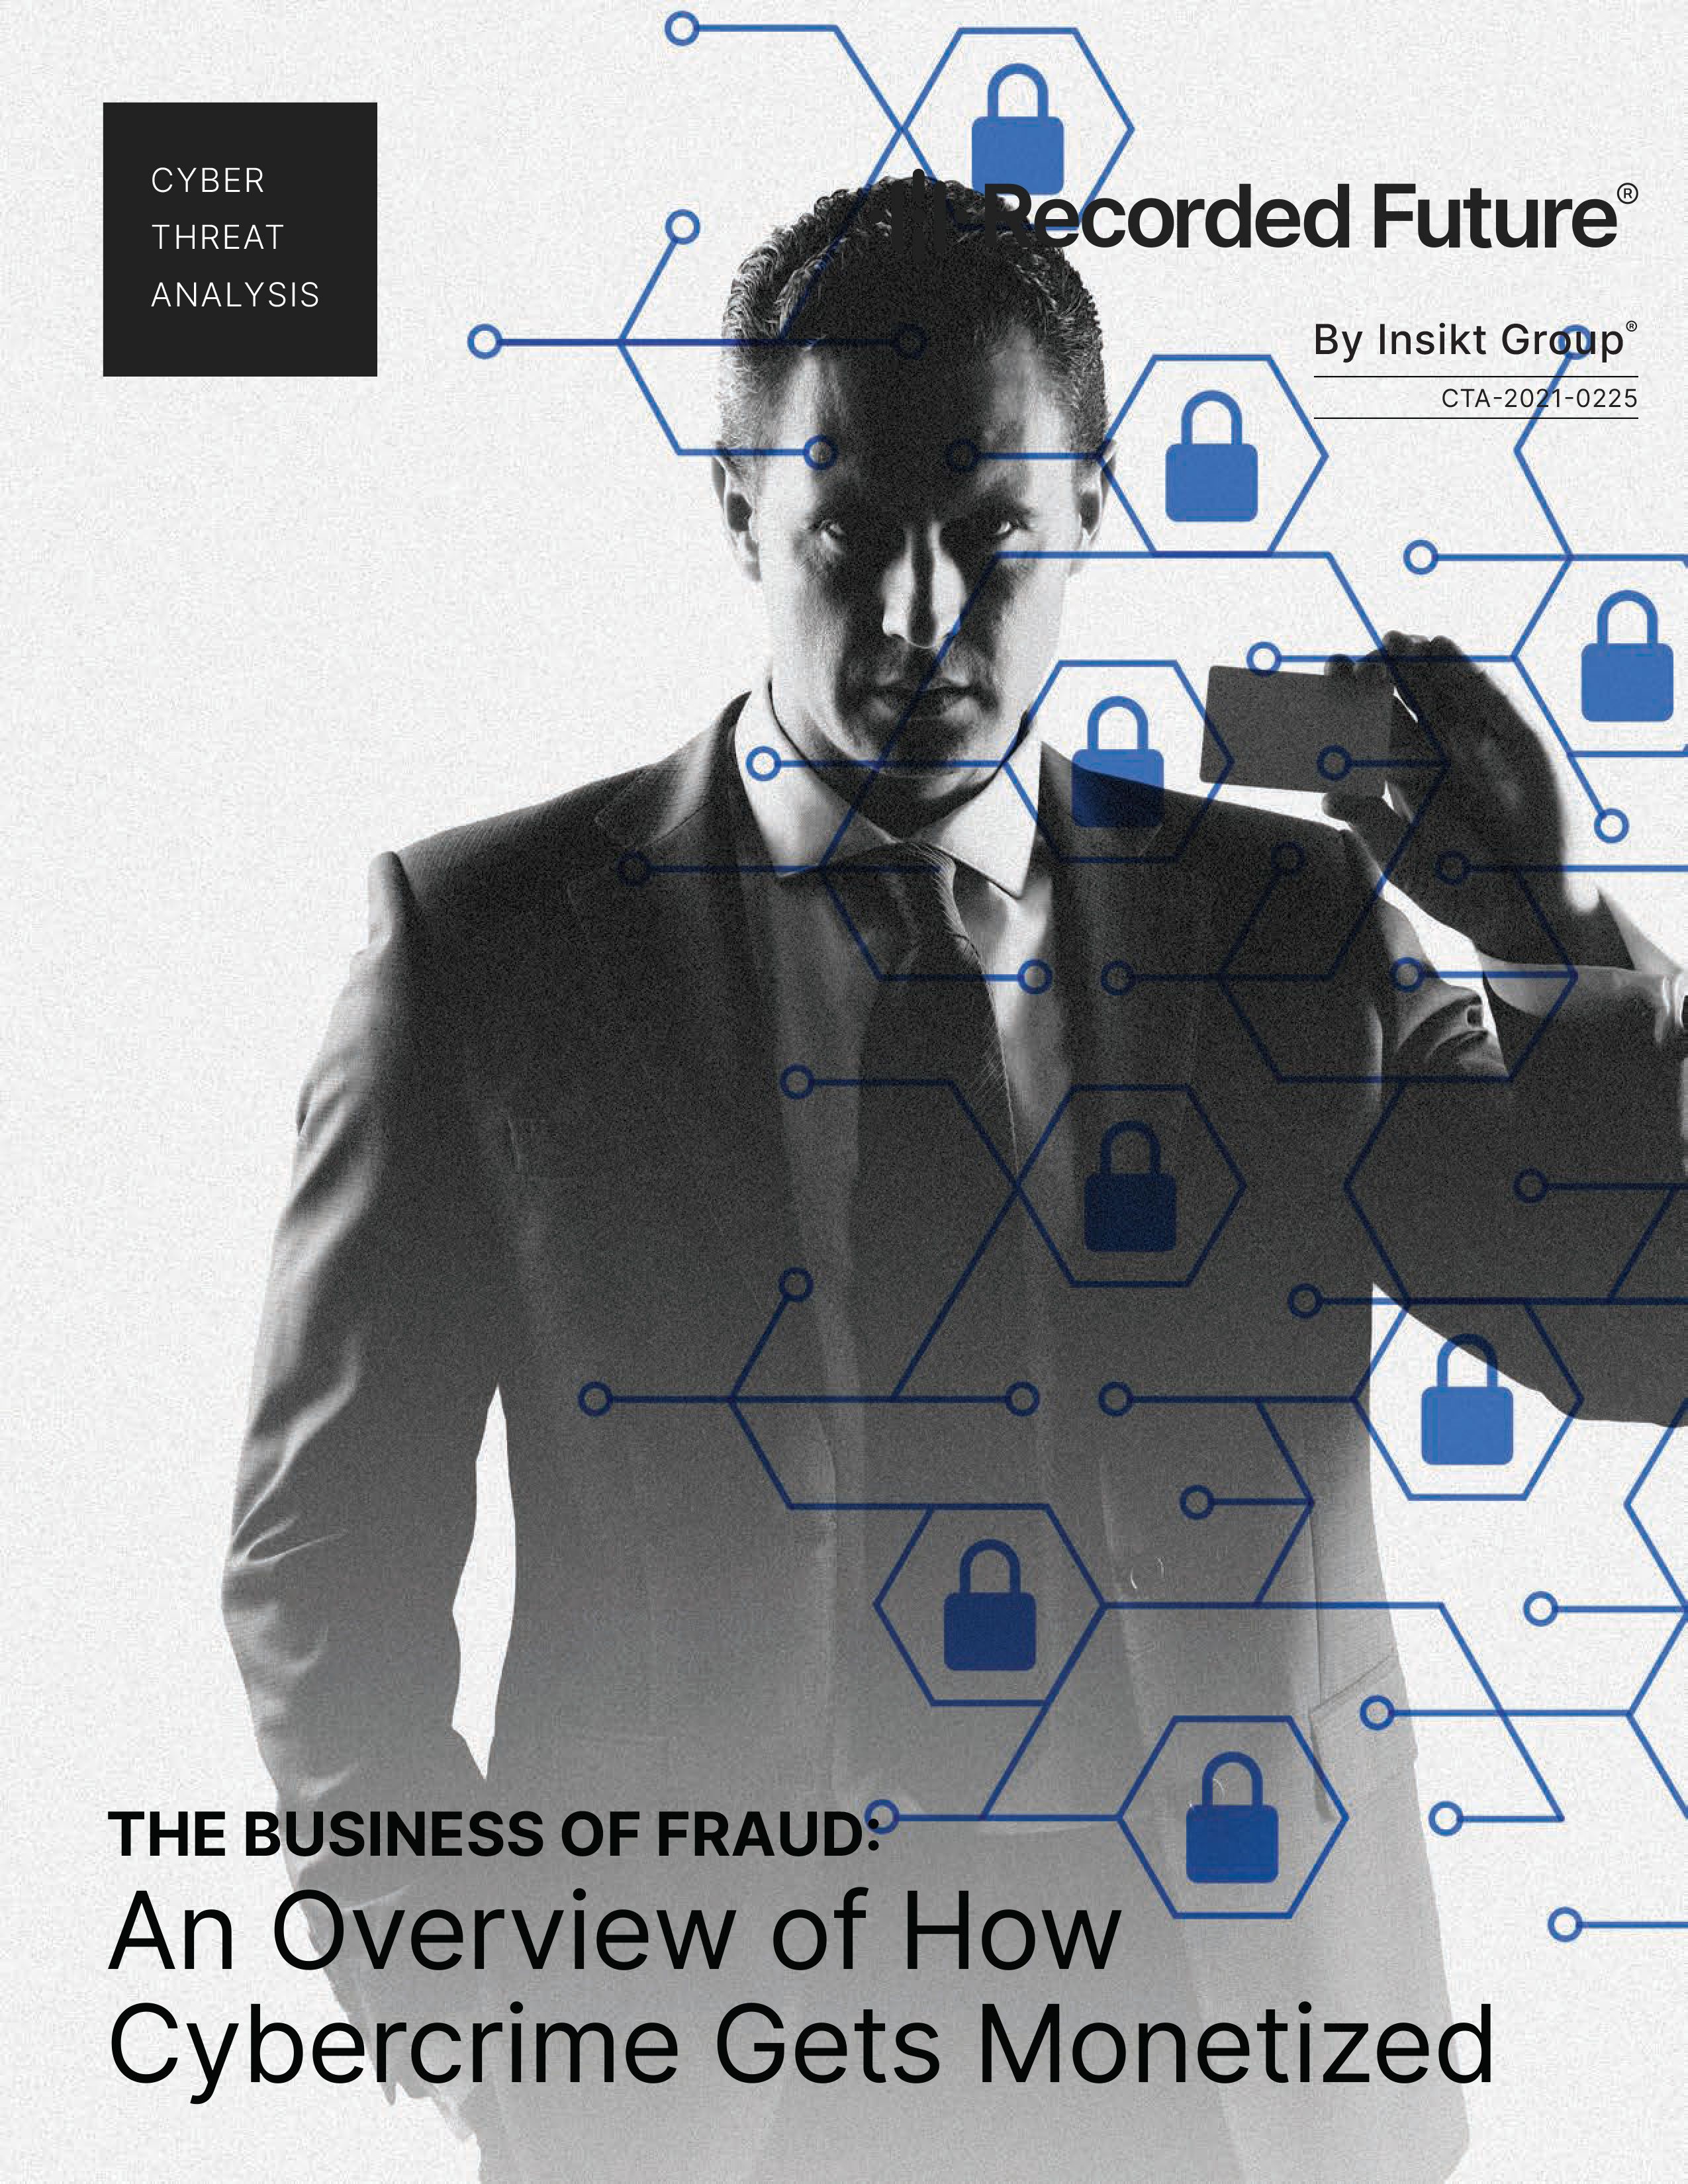 The Business of Fraud: An Overview of How Cybercrime Gets Monetized